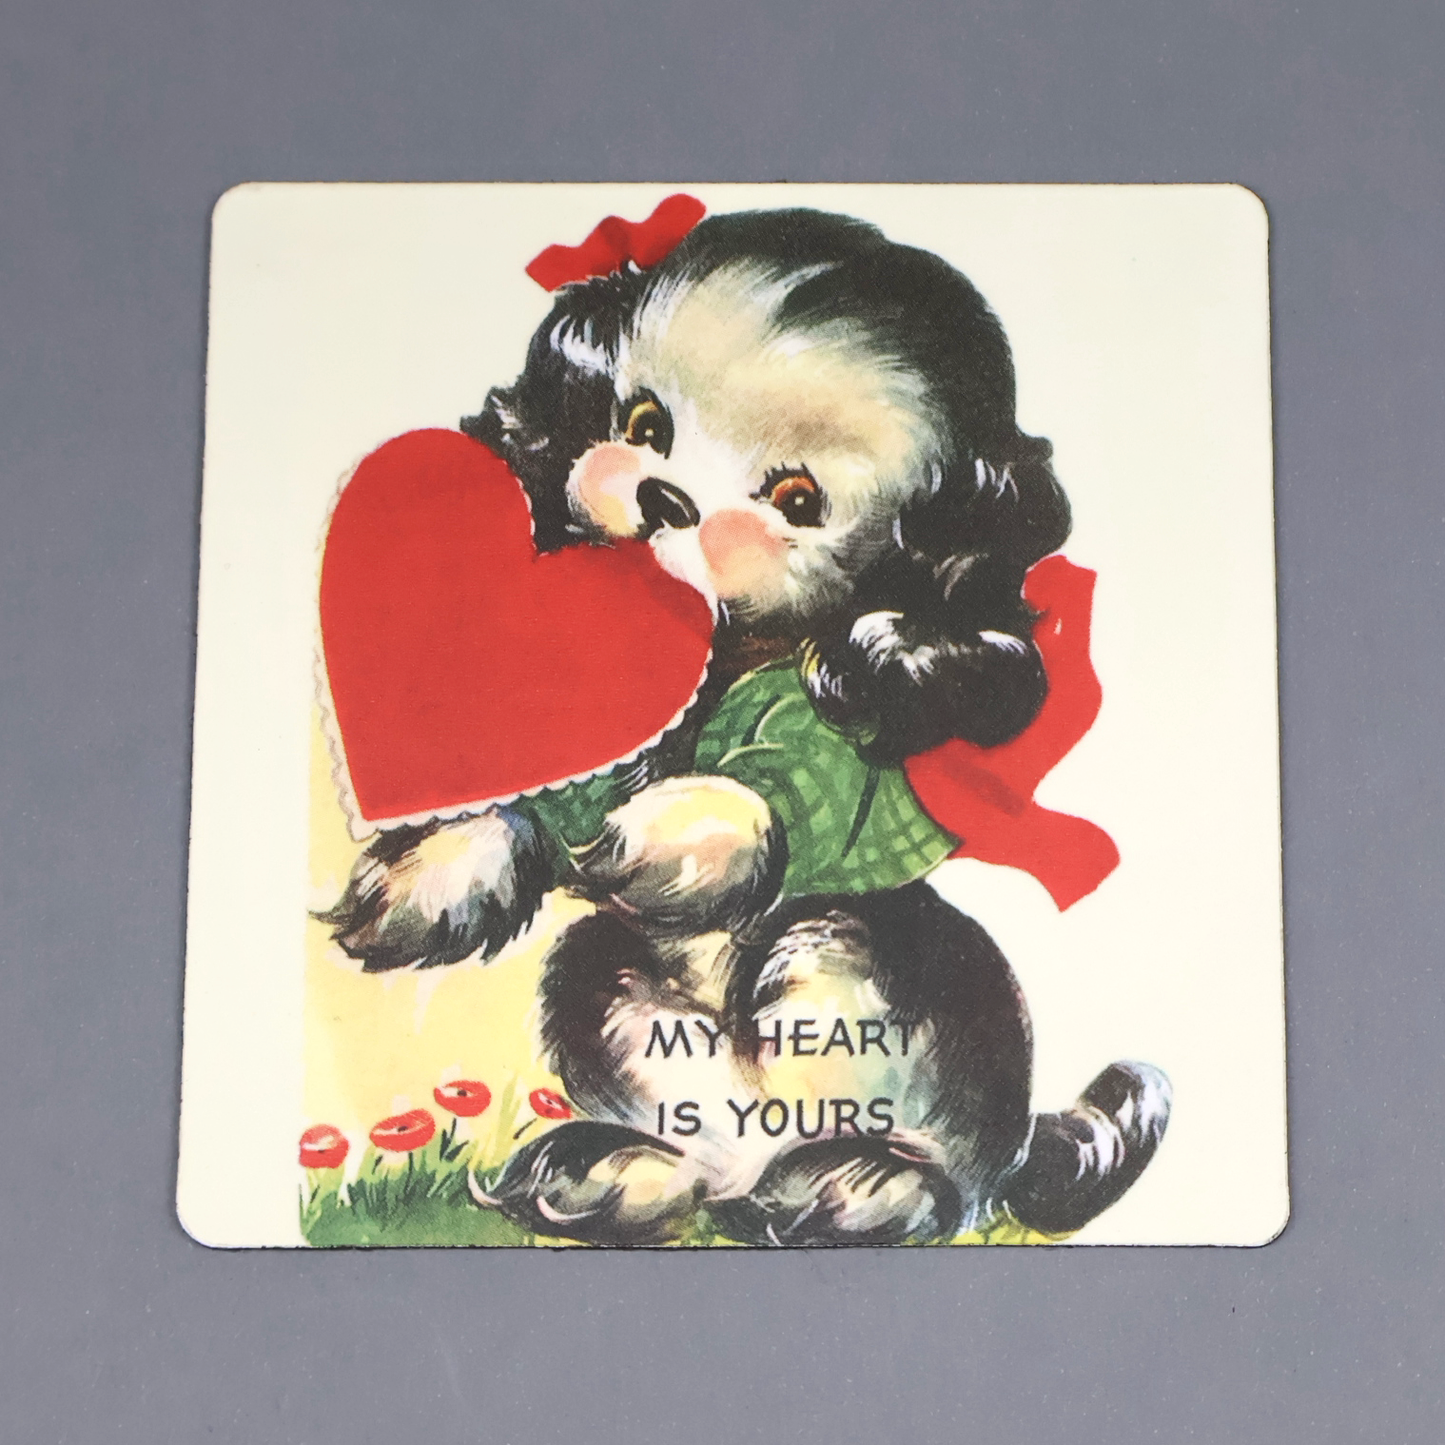 Valentines Day Vintage Style Kittens and Puppies 3x3 Magnet Set of 4-Magnet-Oakview Collectibles